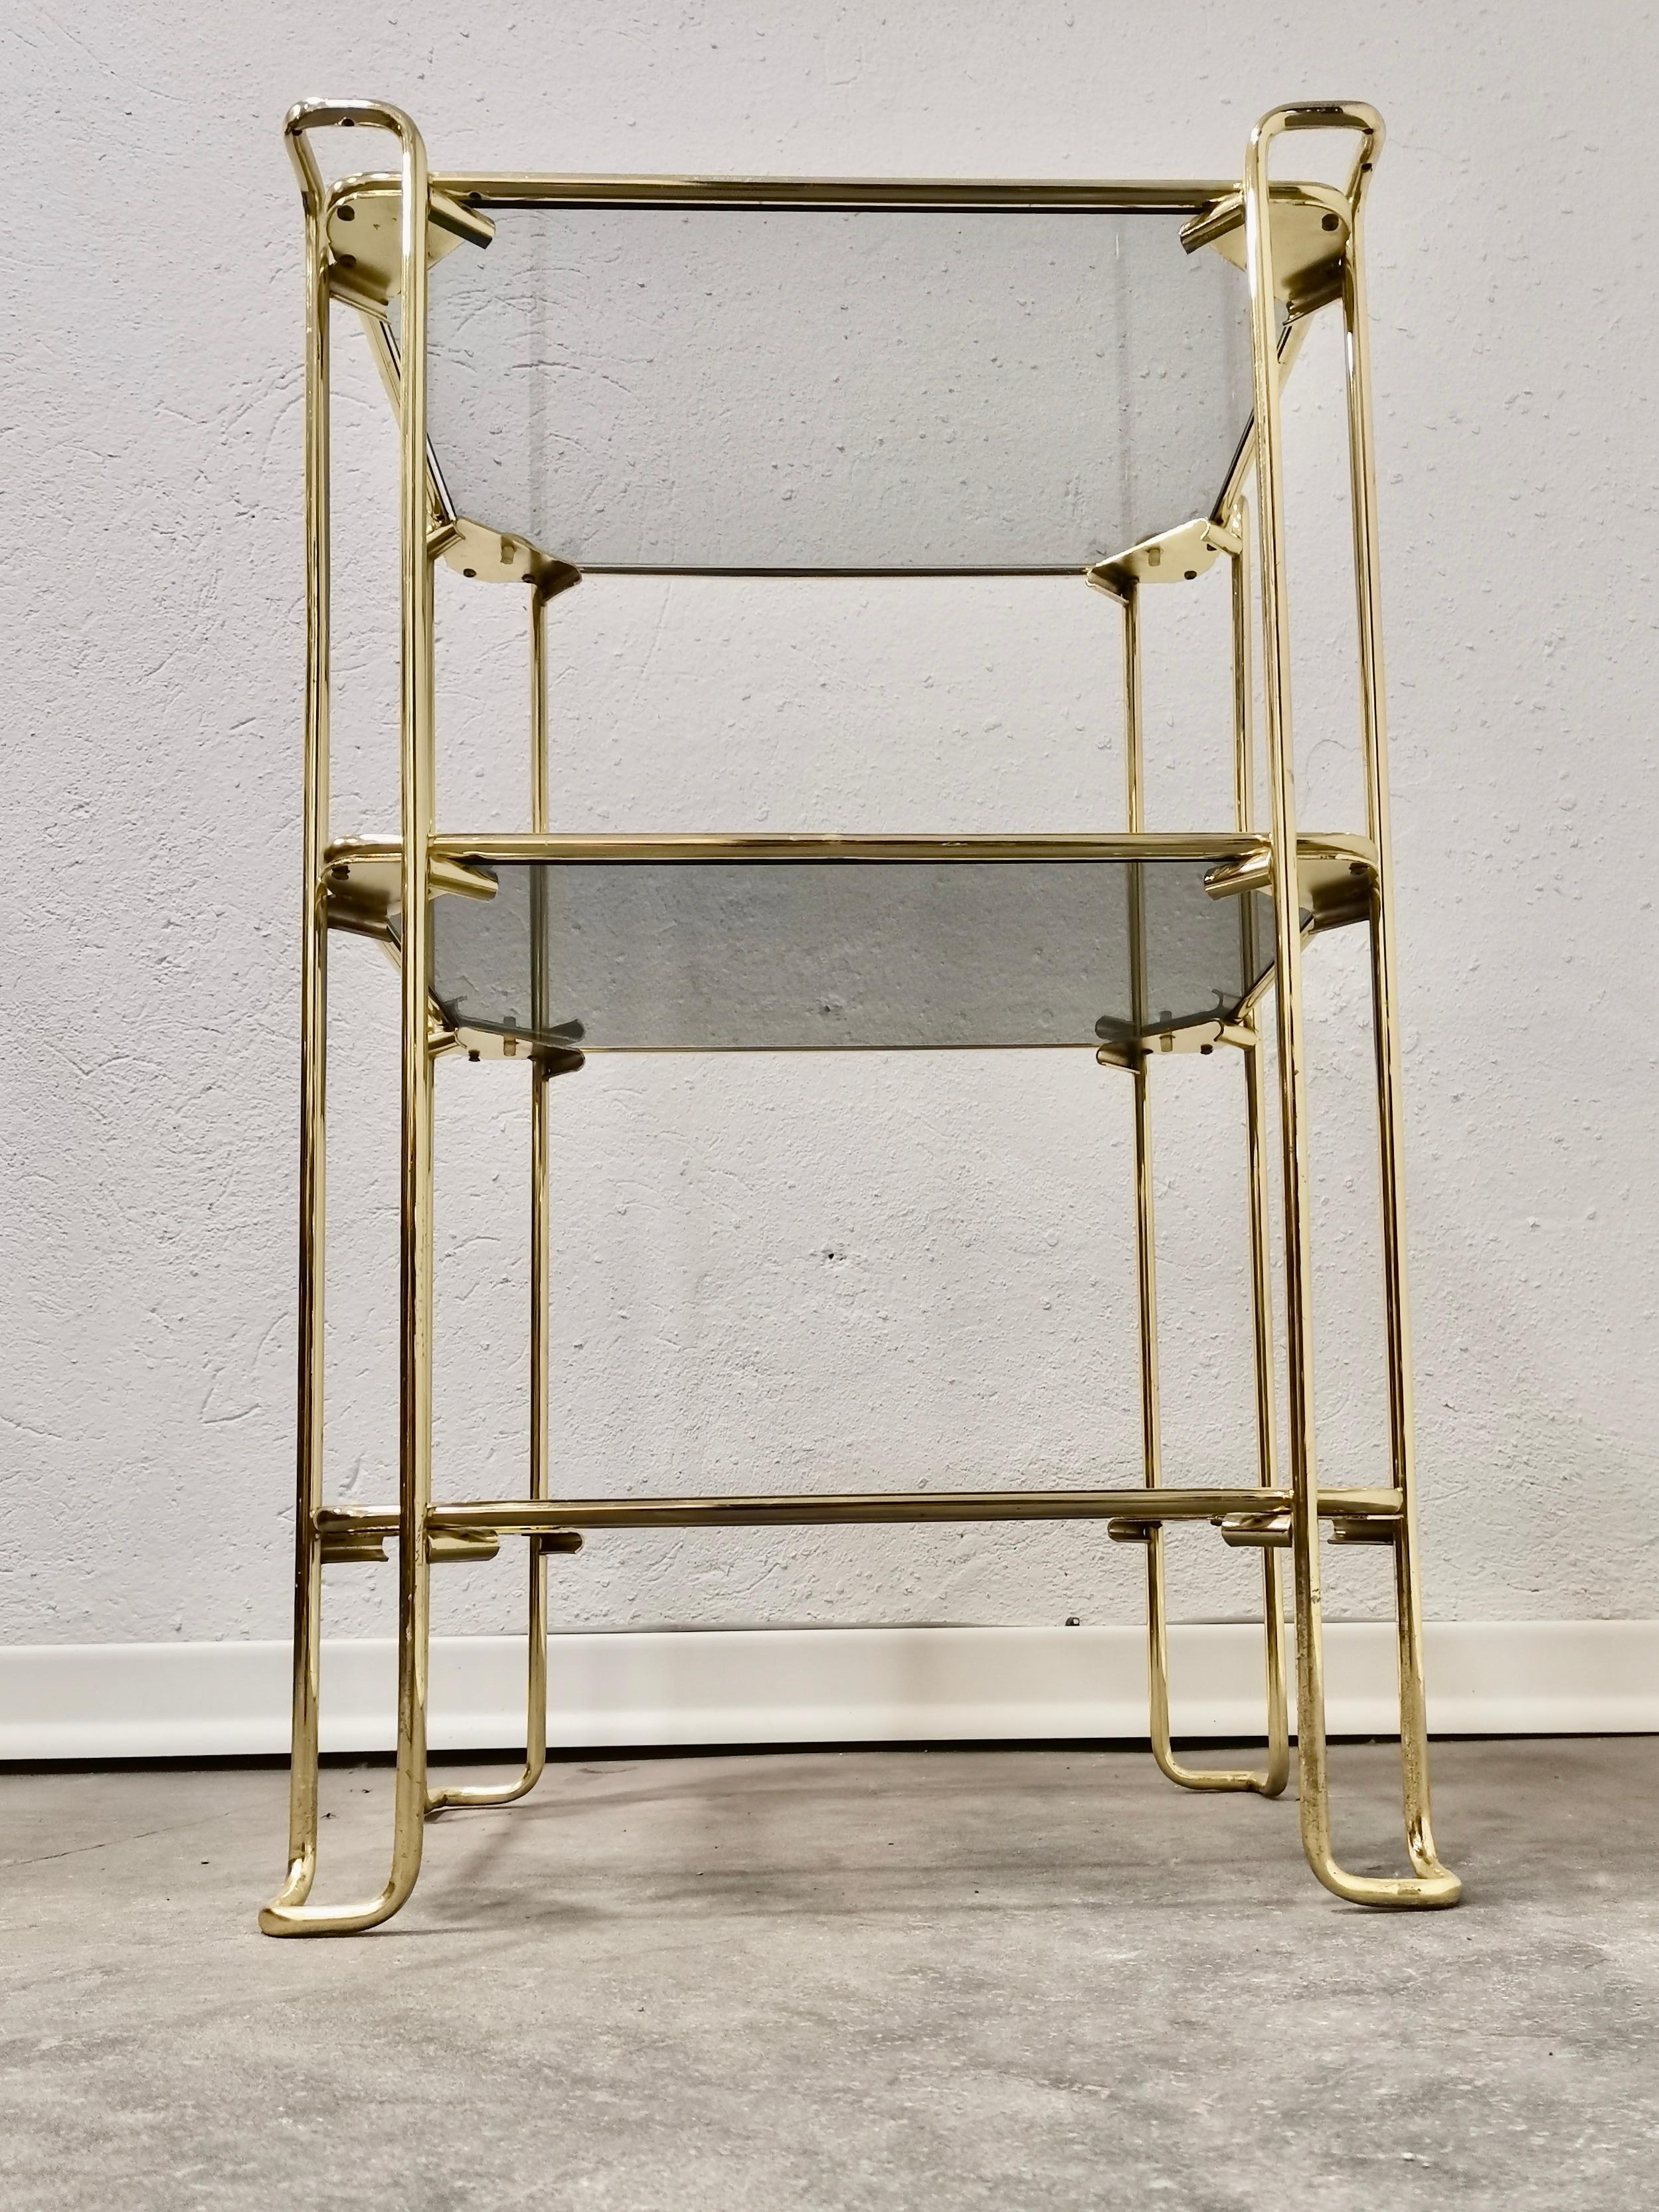 Magnificent Italian brass vintage bar stand. All original parts. The side table has three shelves in smoked glass. Its modern yet classic design gives impression of luxury and style. It can be combined with all styles of furniture and